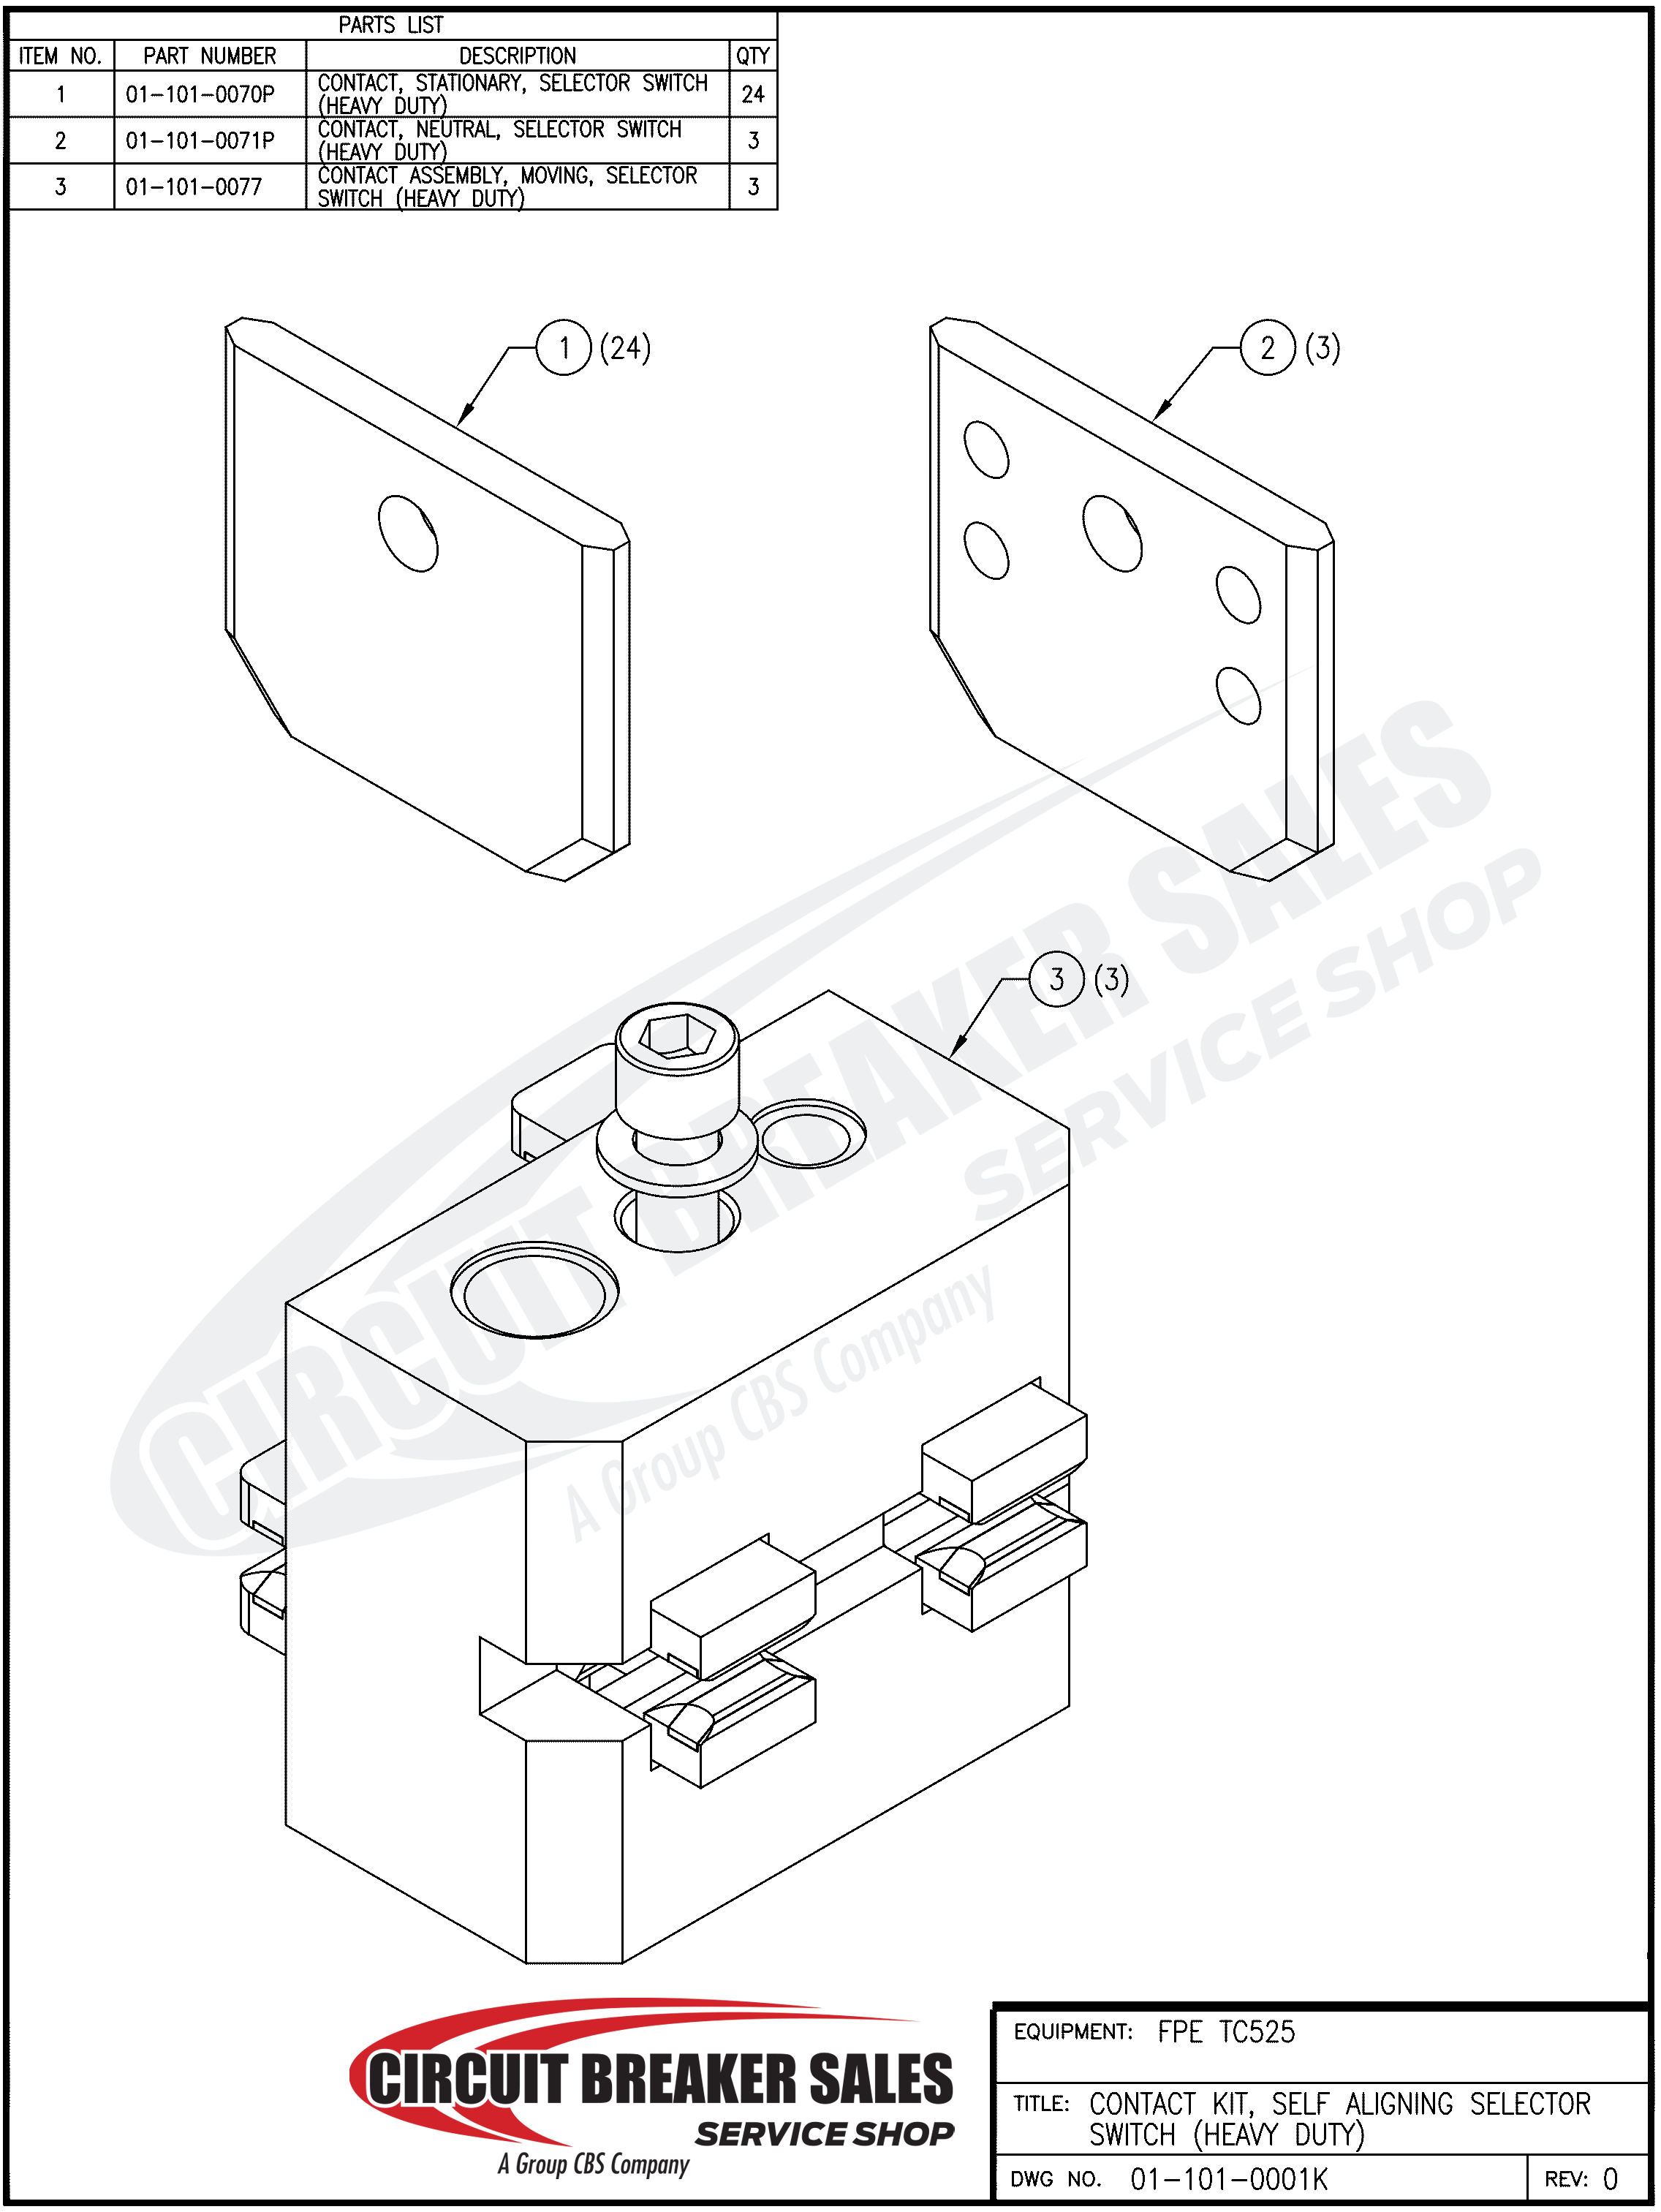 Federal Pacific FPE TC525 Kit - Contact Kit (Heavy Duty) Self Aligning Selector Switch for FPE TC525